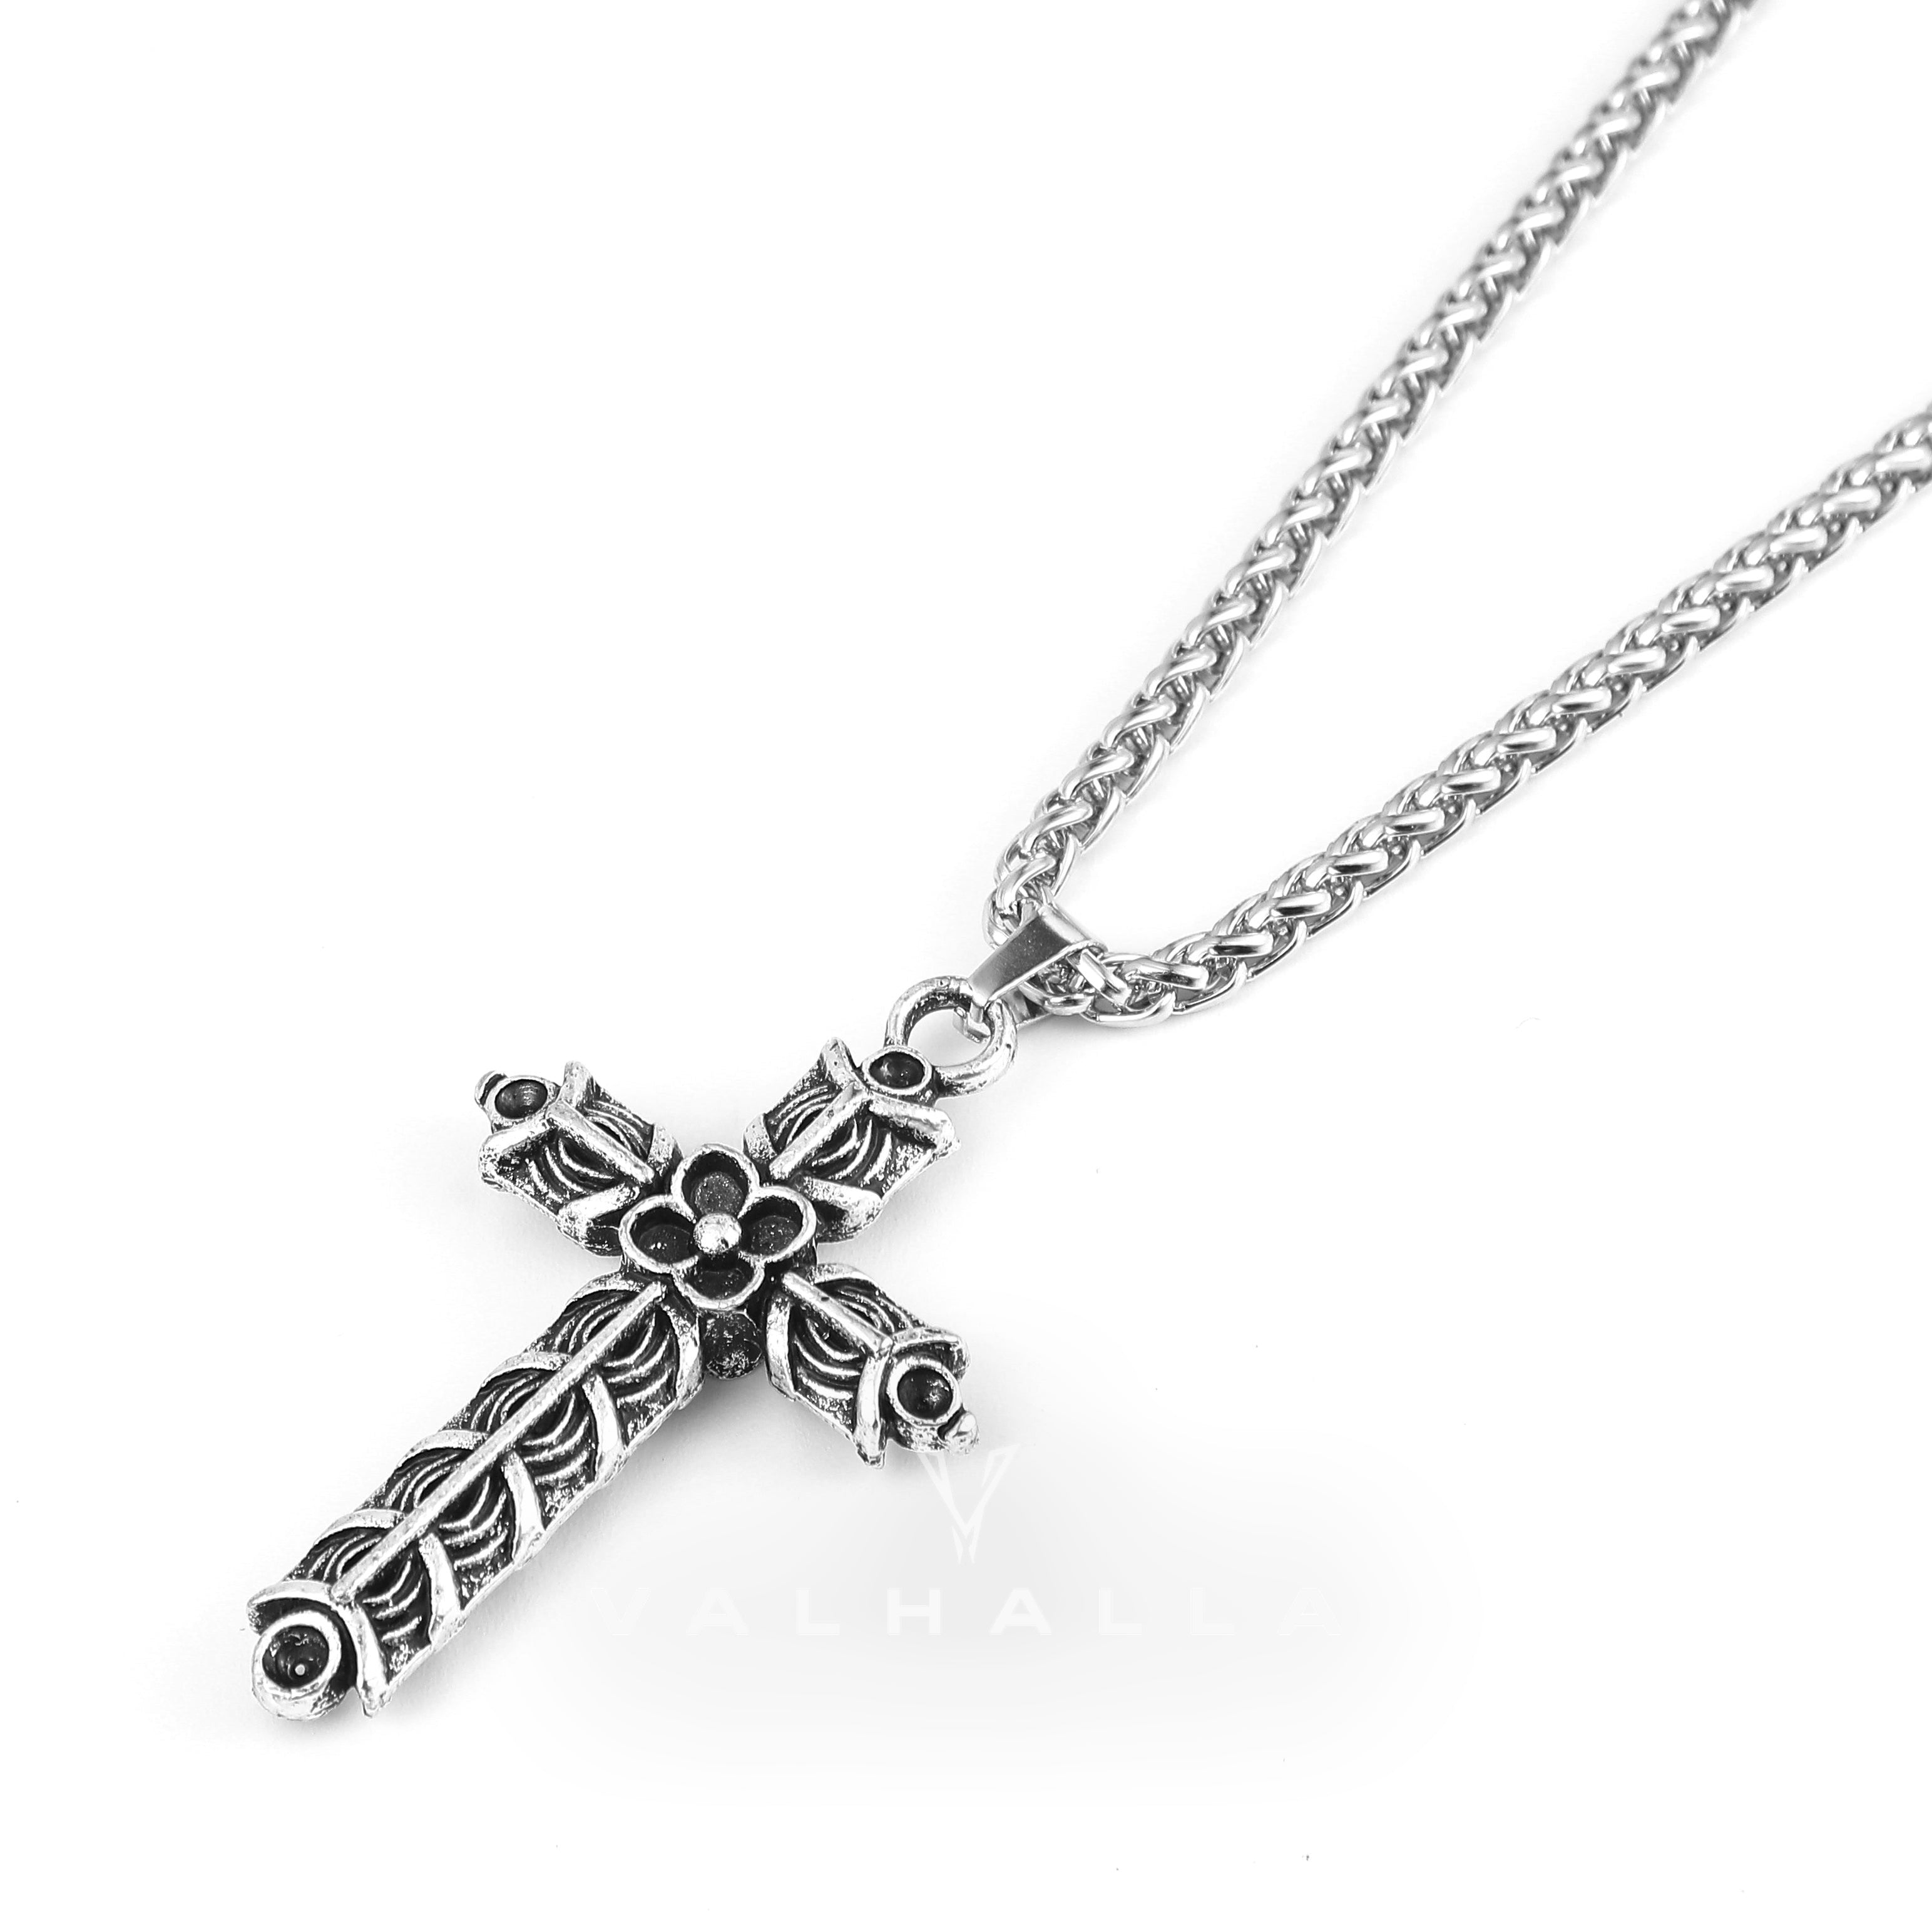 Handcrafted Athelstan's Cross Necklace